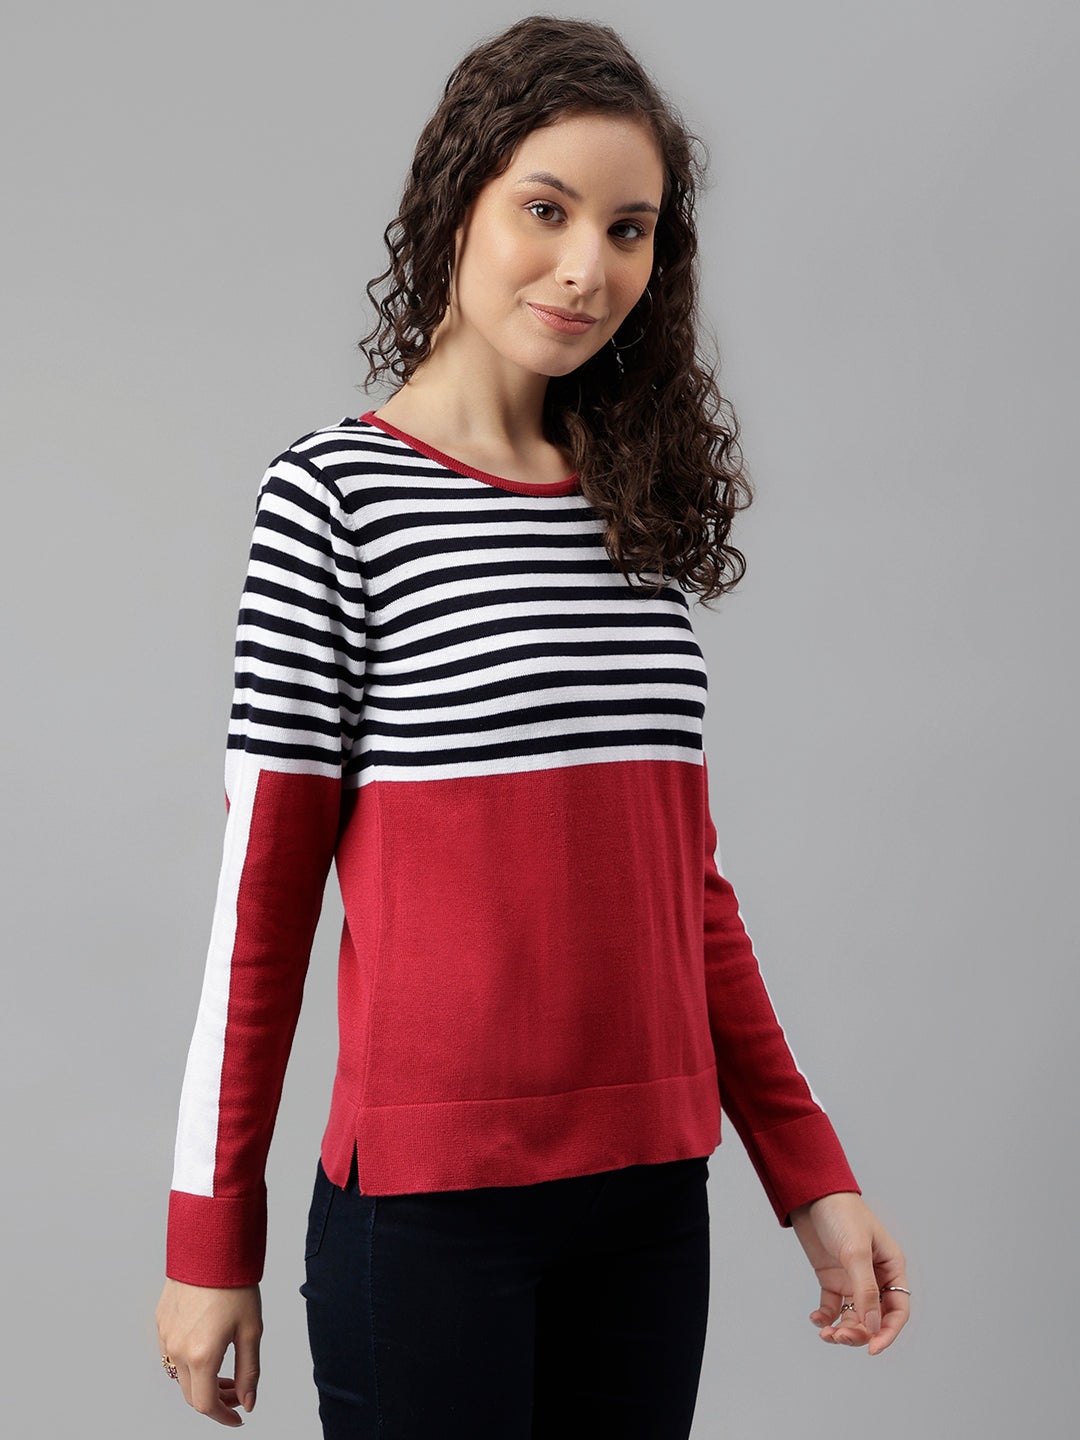 Rose Full Sleeve Solid Pullover Sweatertop